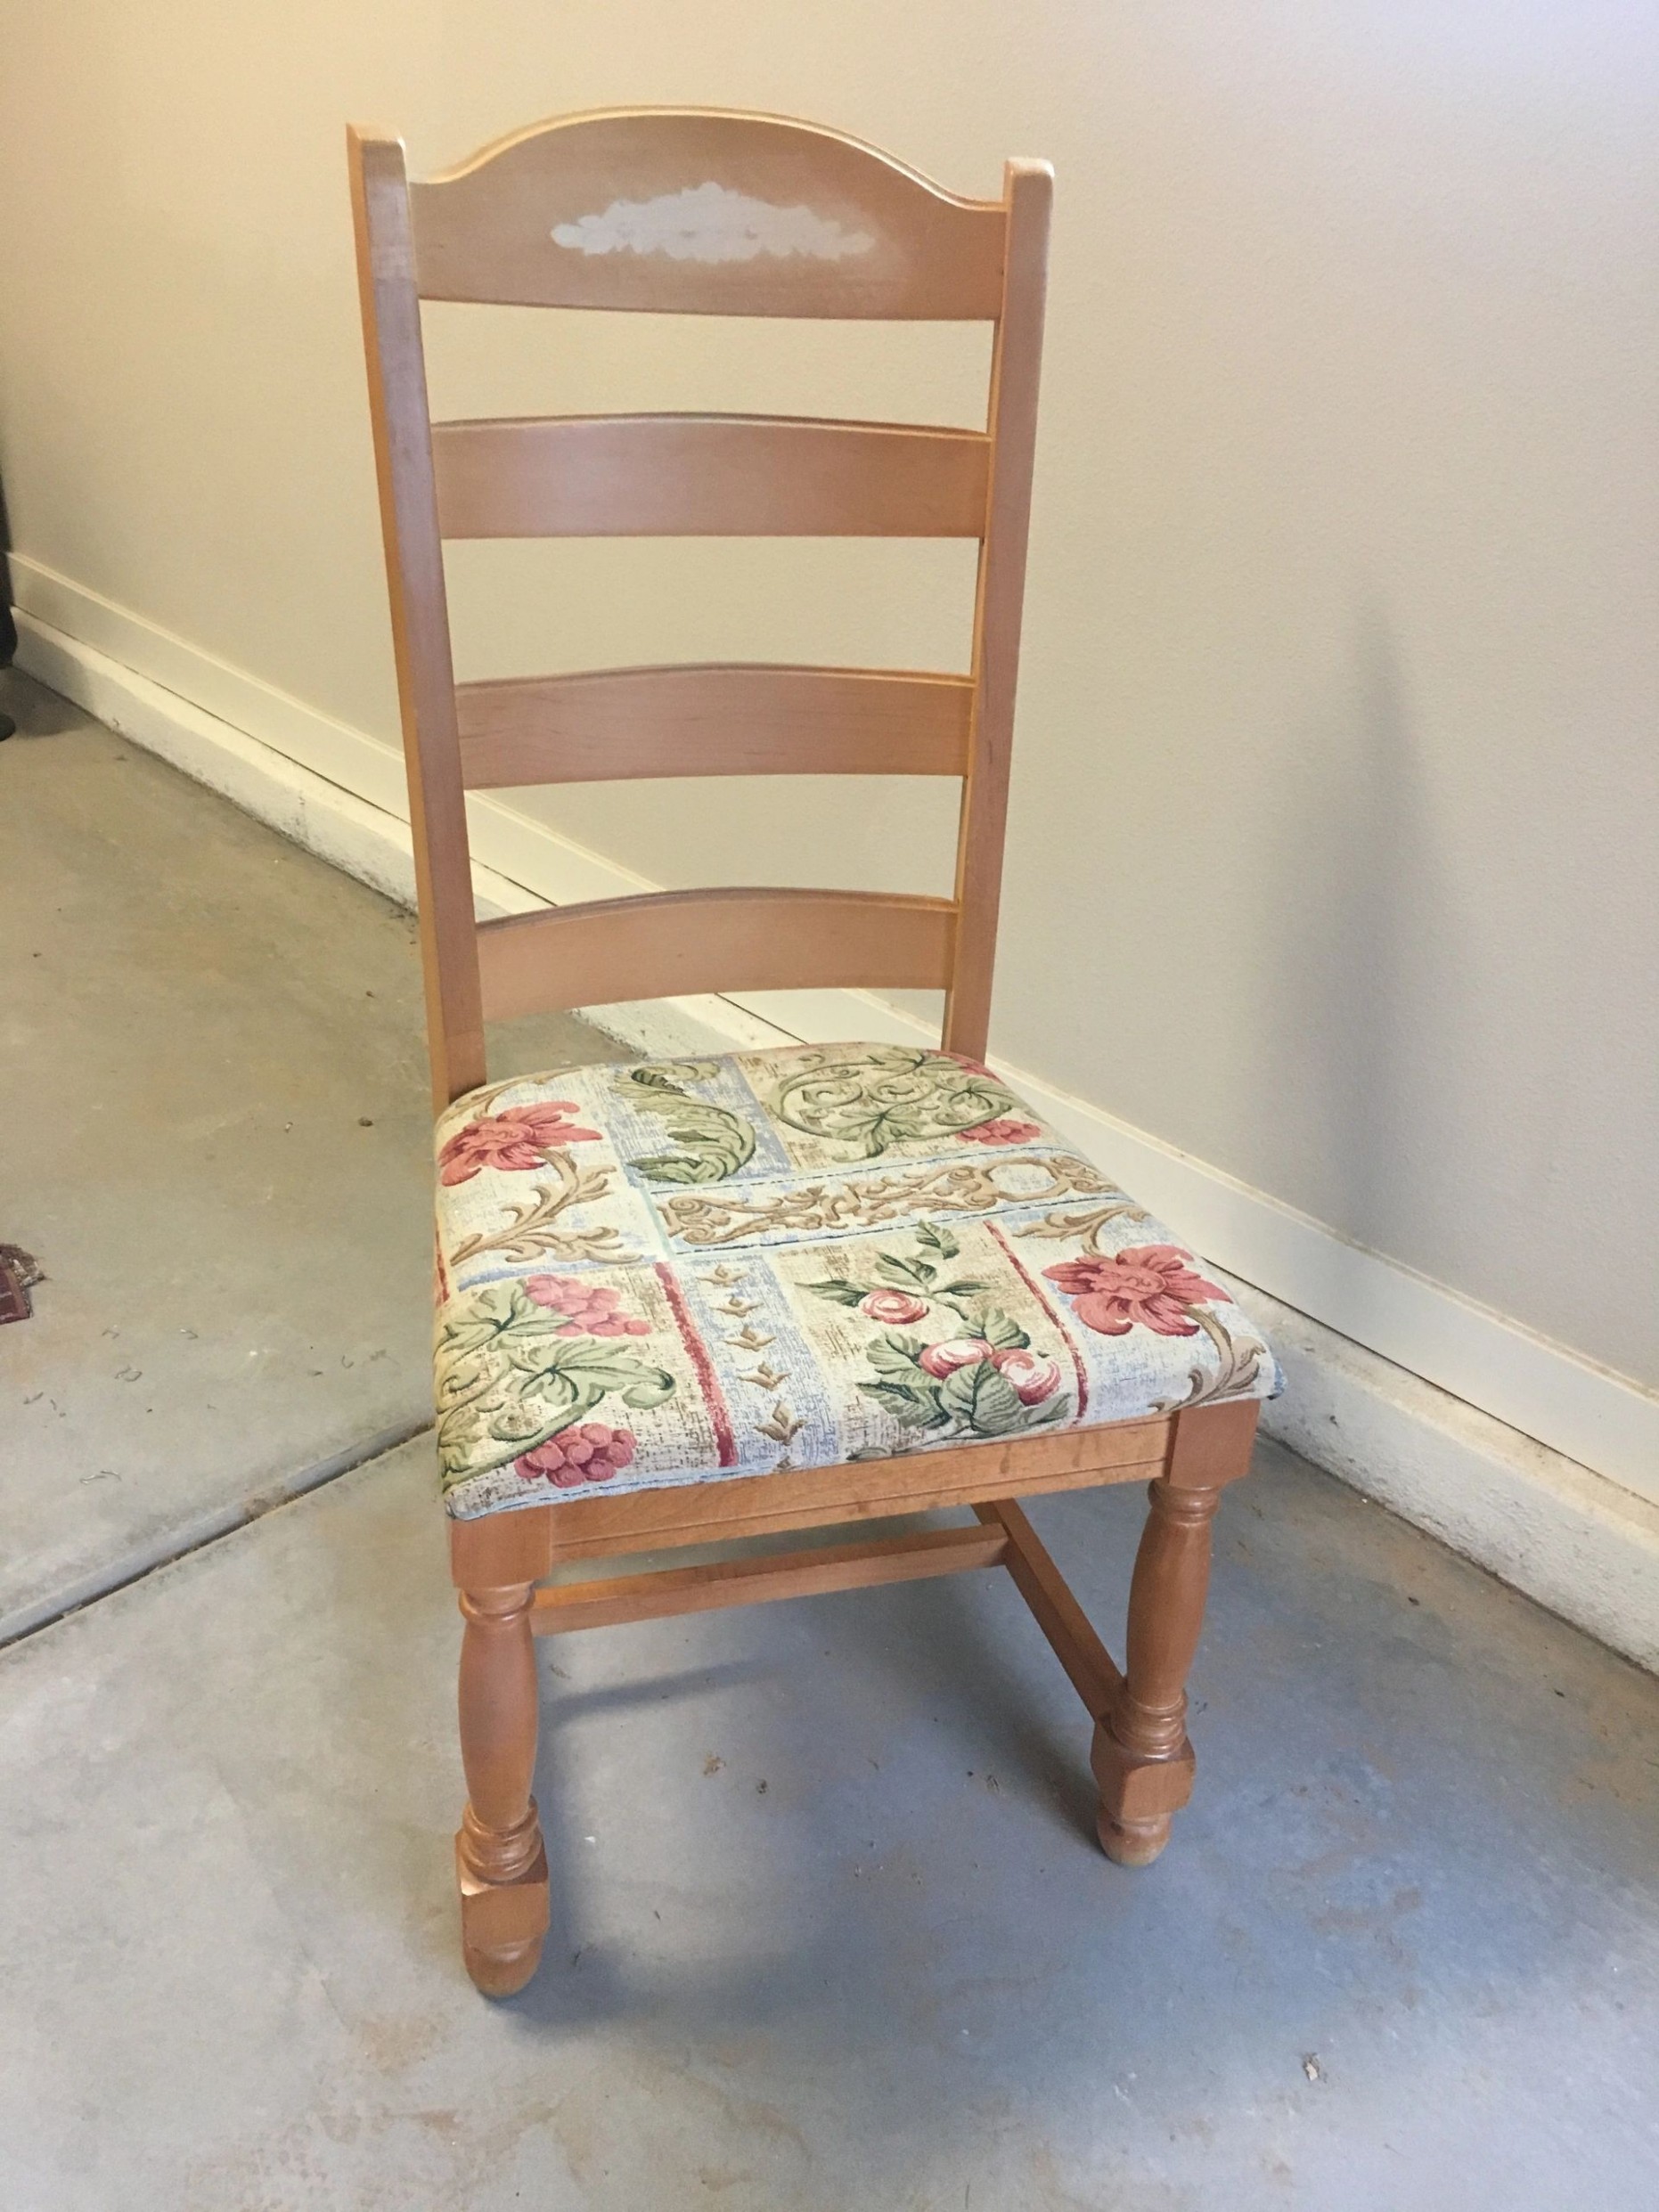 Dining Table & Chairs: Chalk Paint Refinish & Re Upholstery Annie Sloan Chalk Paint Las Vegas